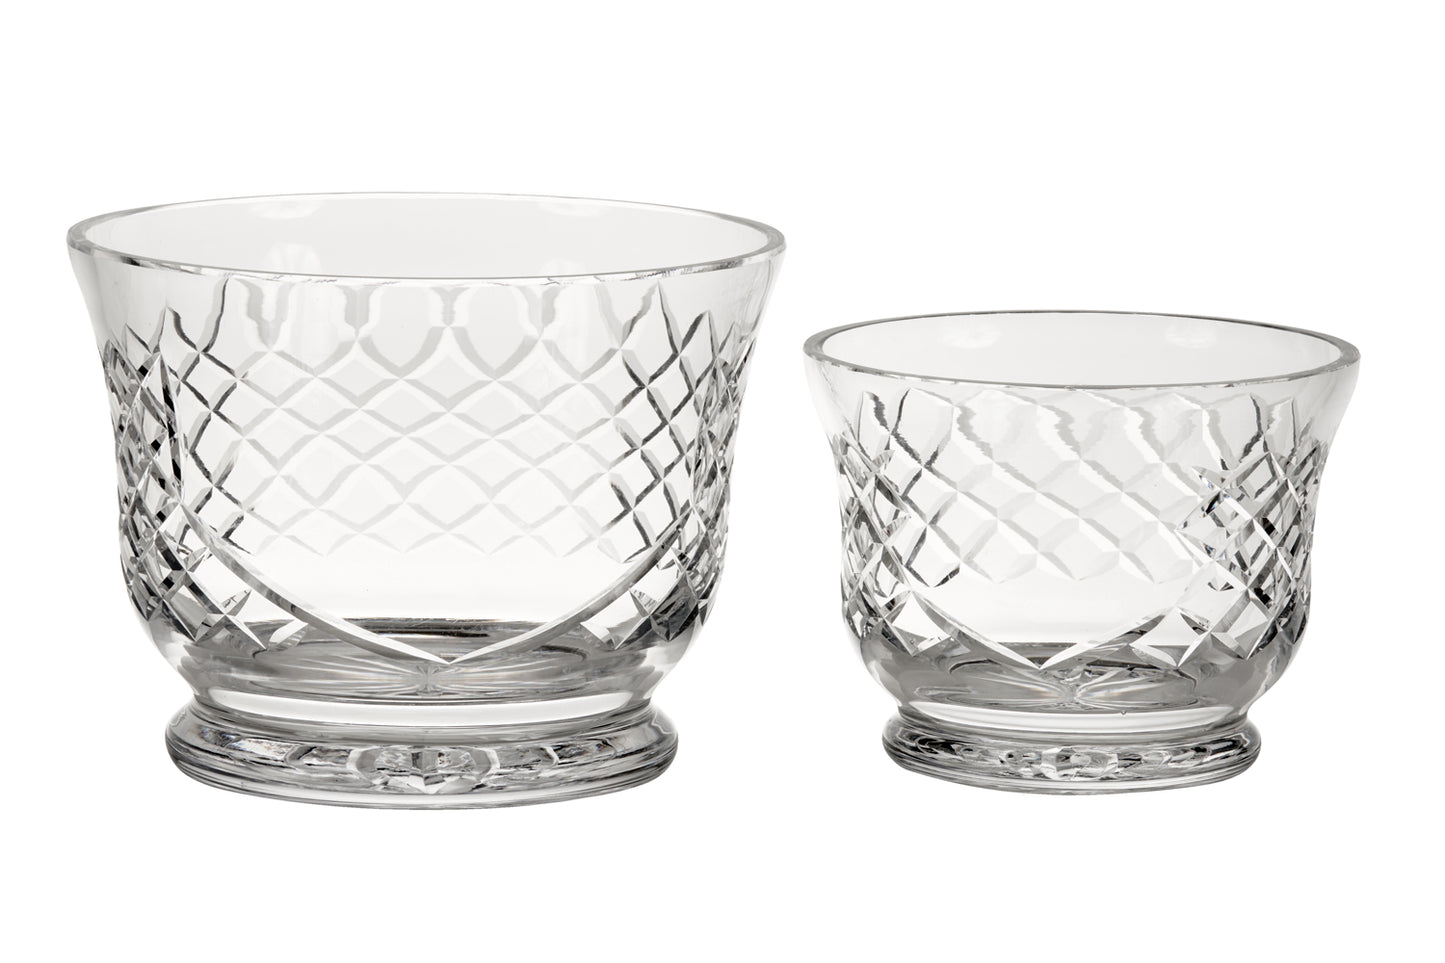 Crystal Round Flared Bowl With Medallion Ii Pattern, 5.5" X 7.5"